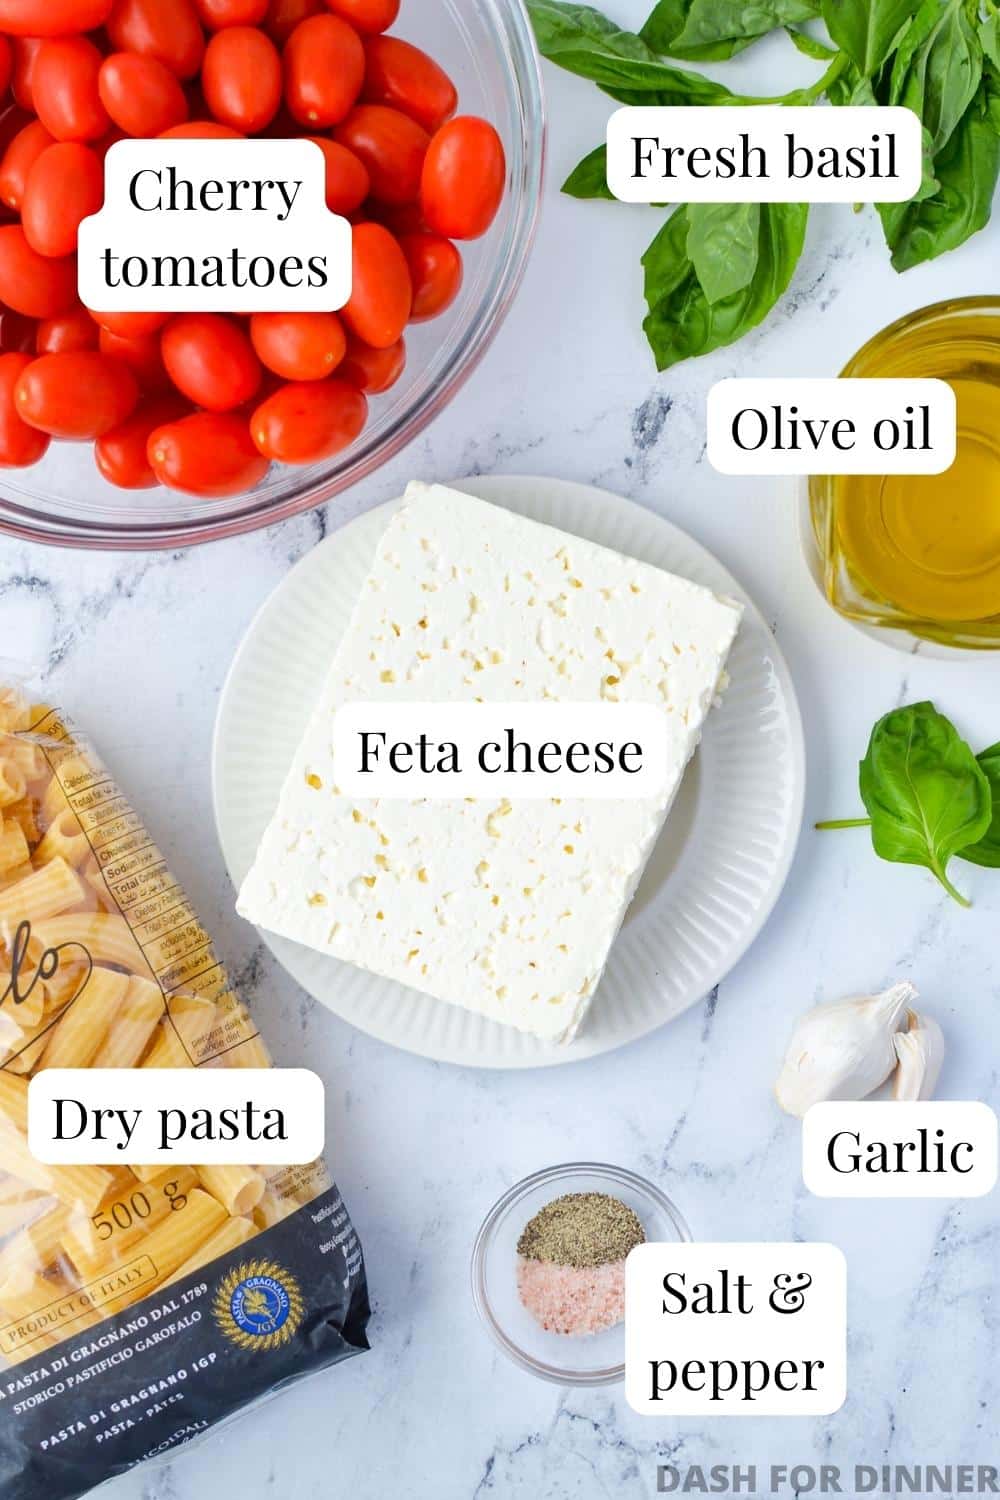 The ingredients needed to make baked feta: feta, tomatoes, basil, olive oil, and pasta.